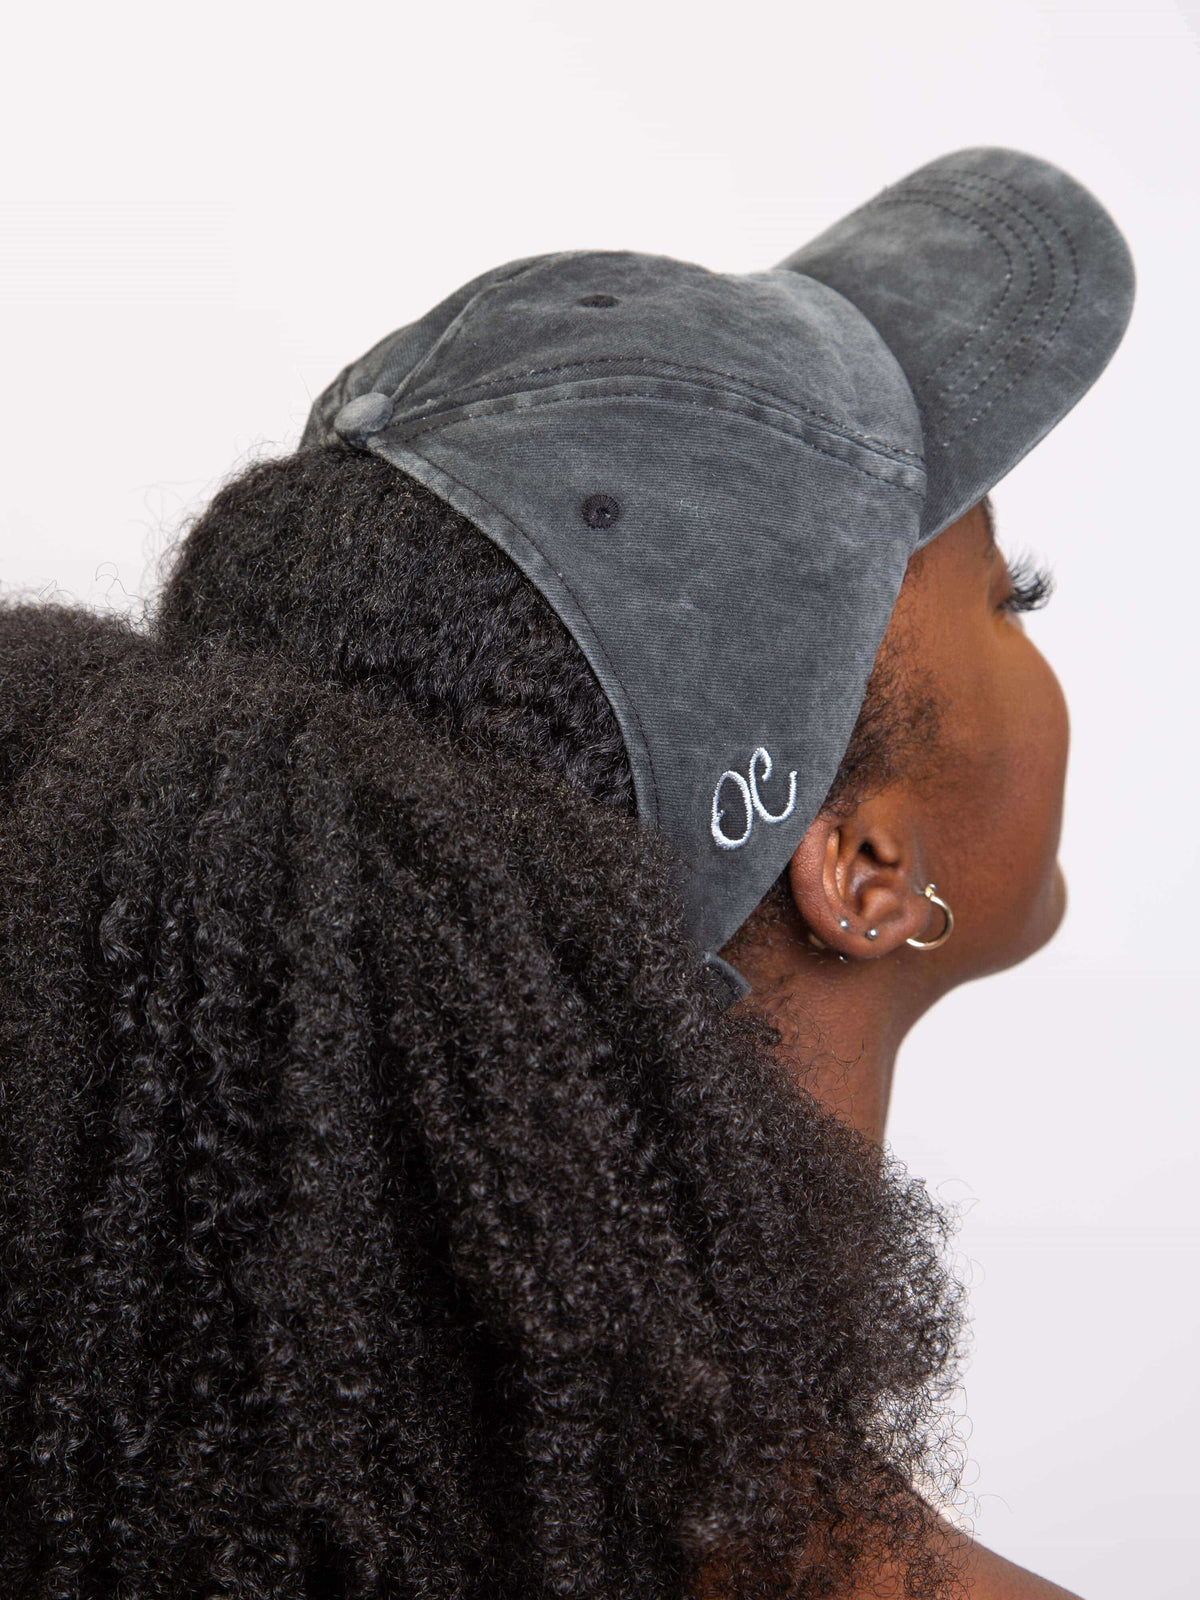 Only Curls Satin Lined Baseball Hat (with open back) - Washed Grey - Only Curls